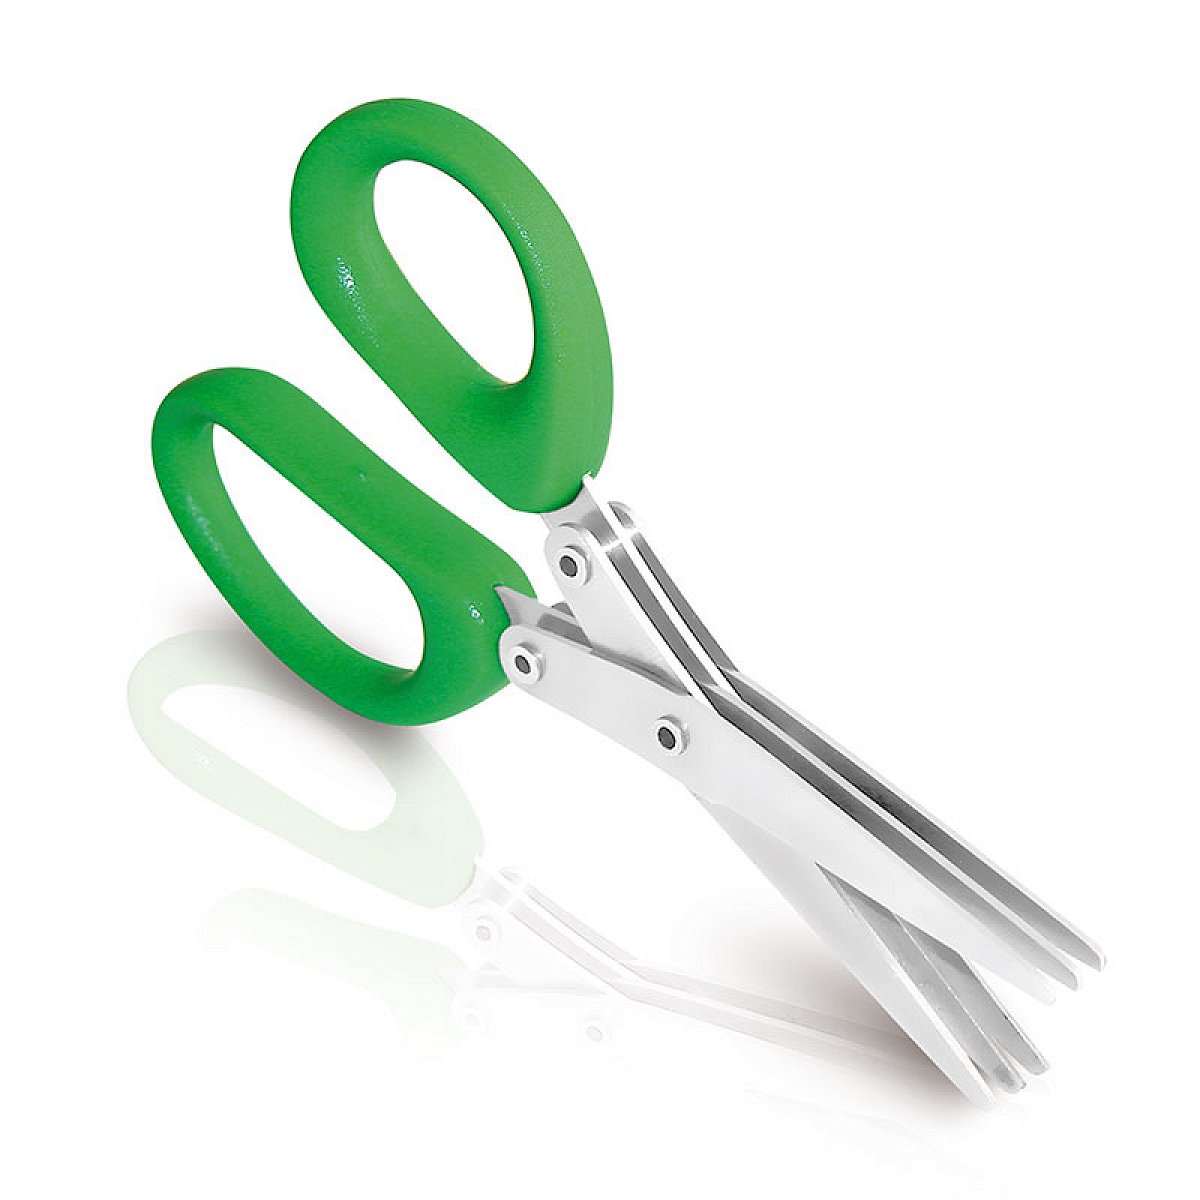 Herb scissors with 6 blades